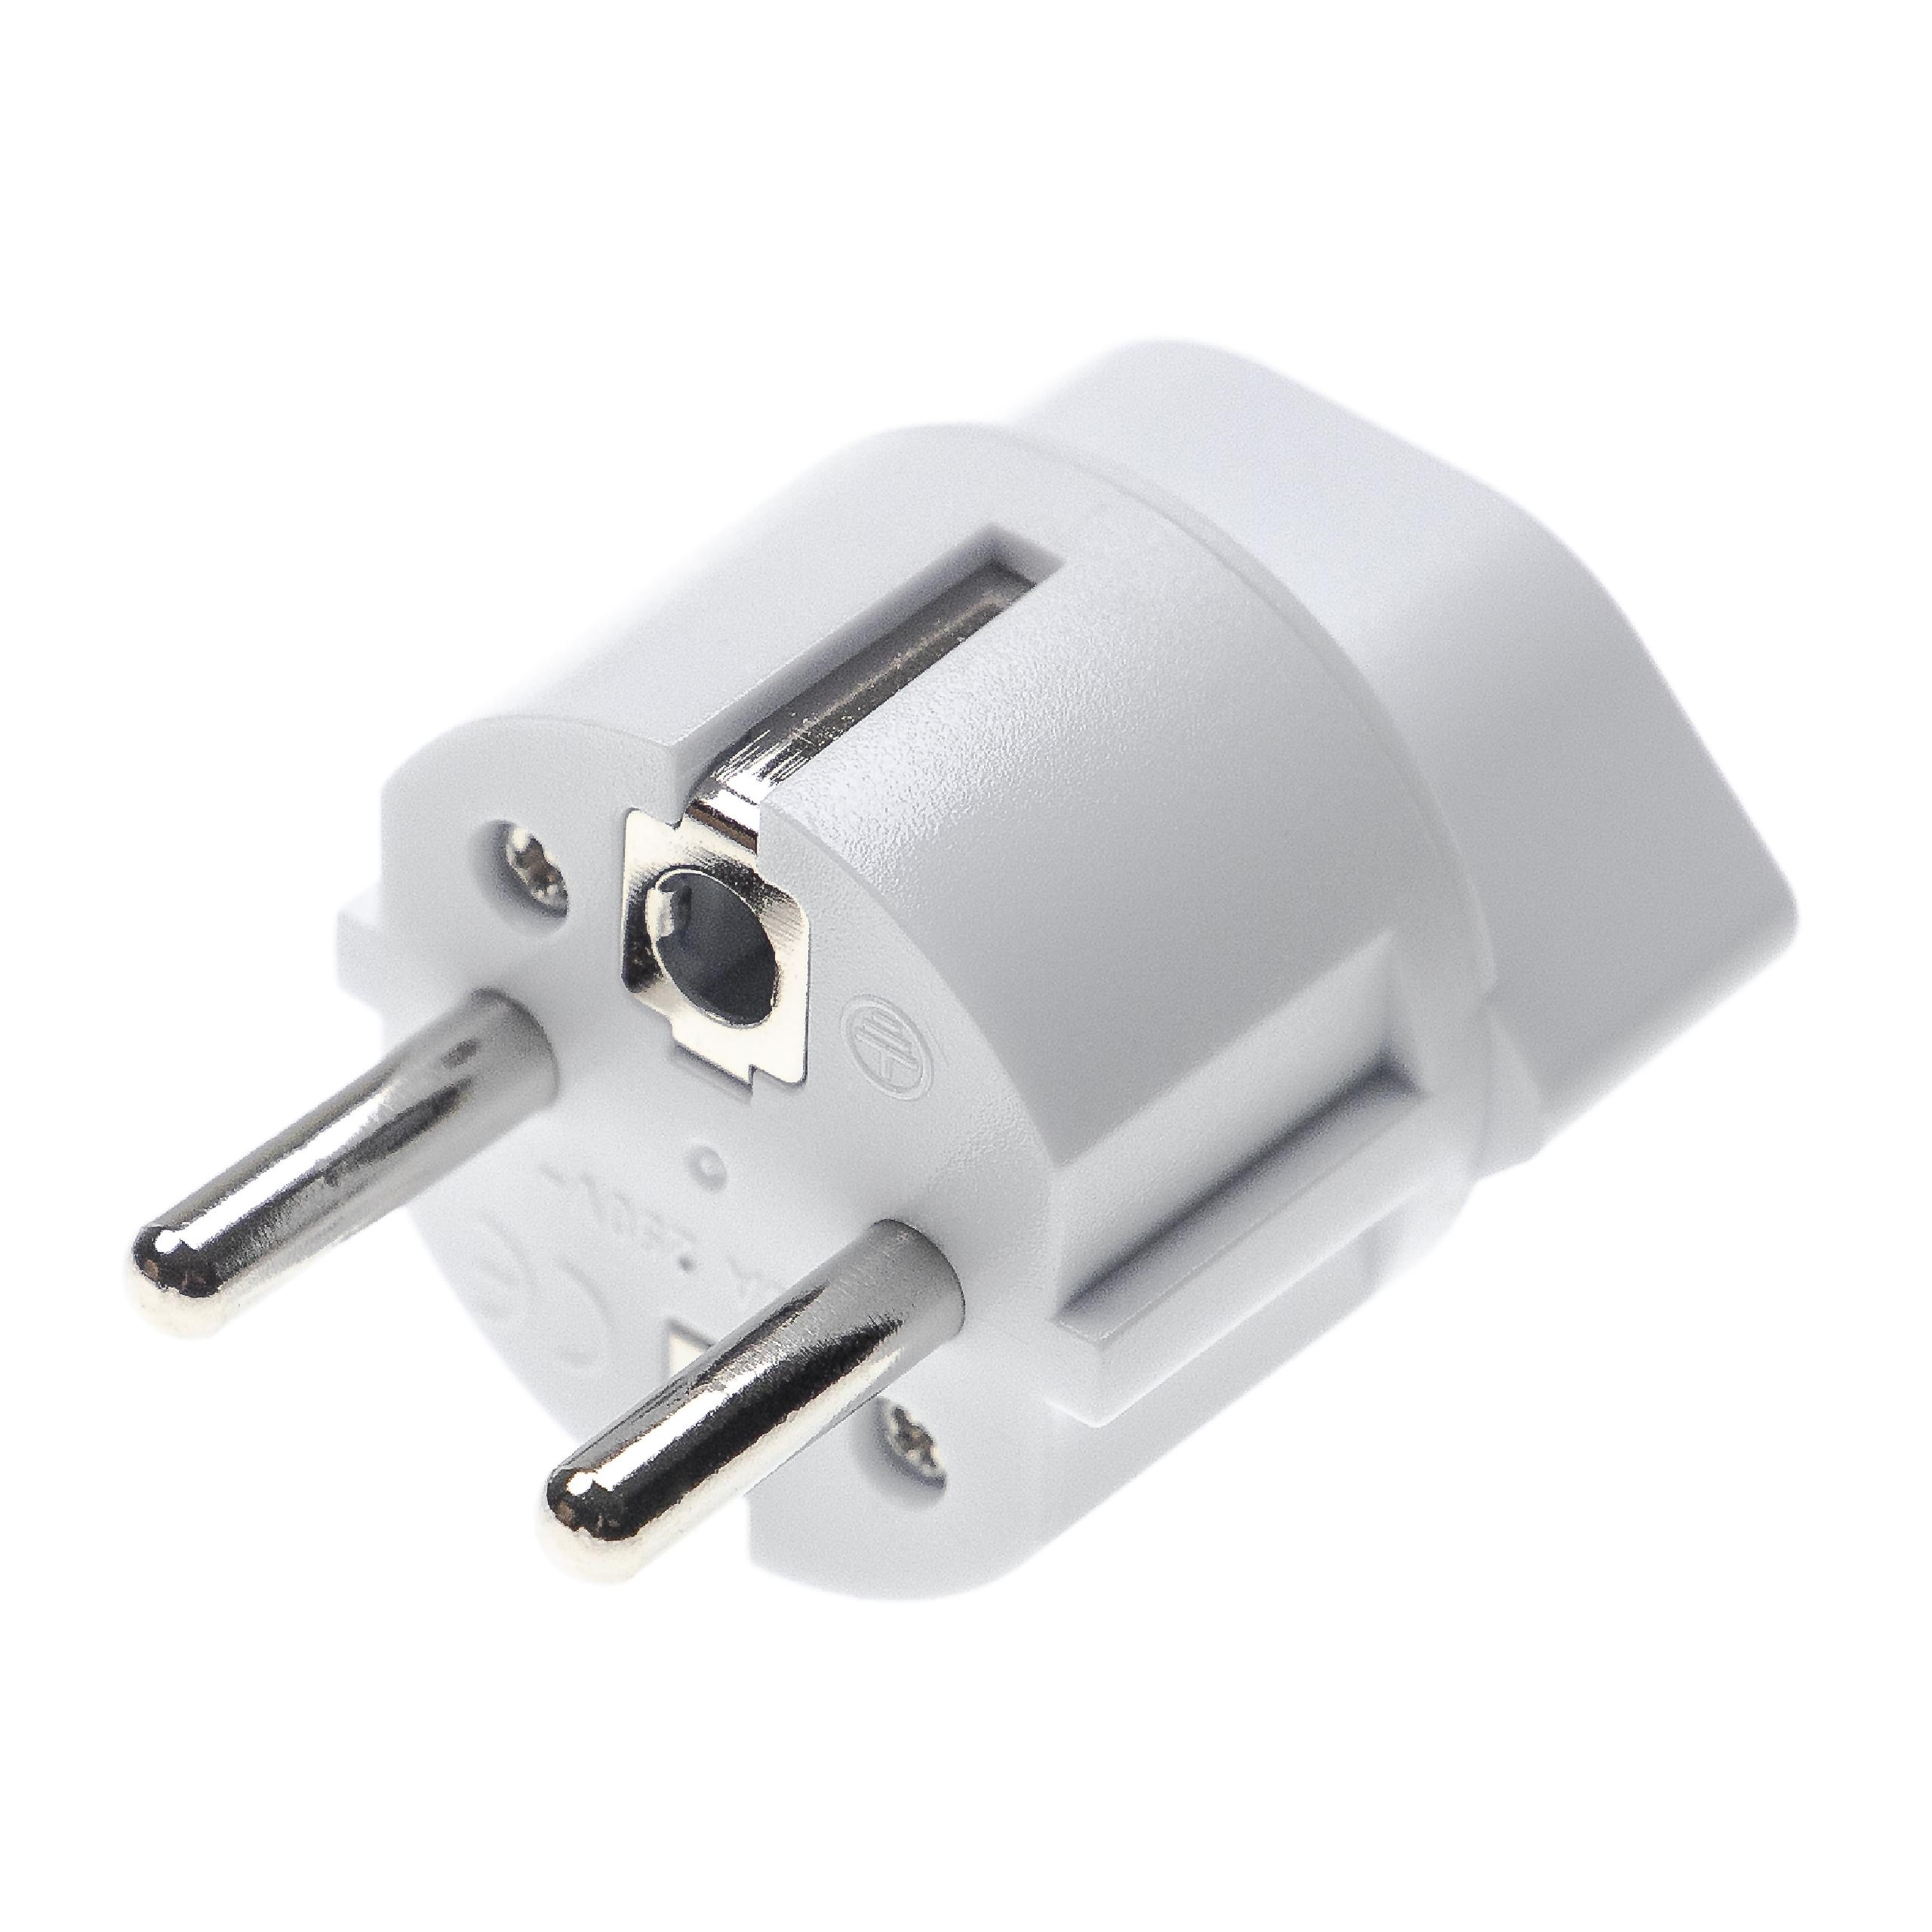 vhbw Travel Adapter Type J, SN 441011 (EU plug to Swiss socket / CH Connector System) - Travel Adapter White, 